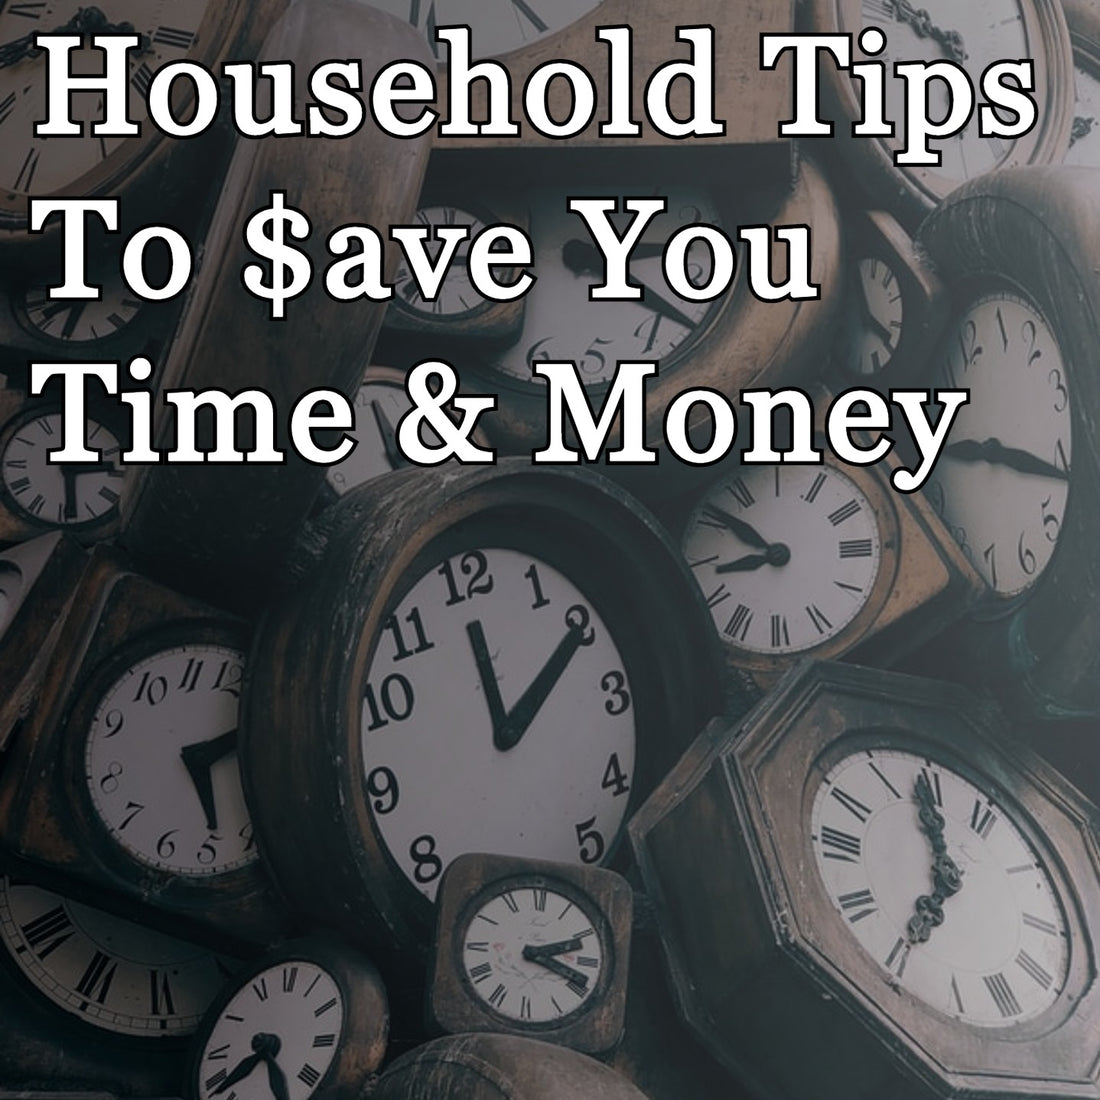 Household Tips To Save Time & Money